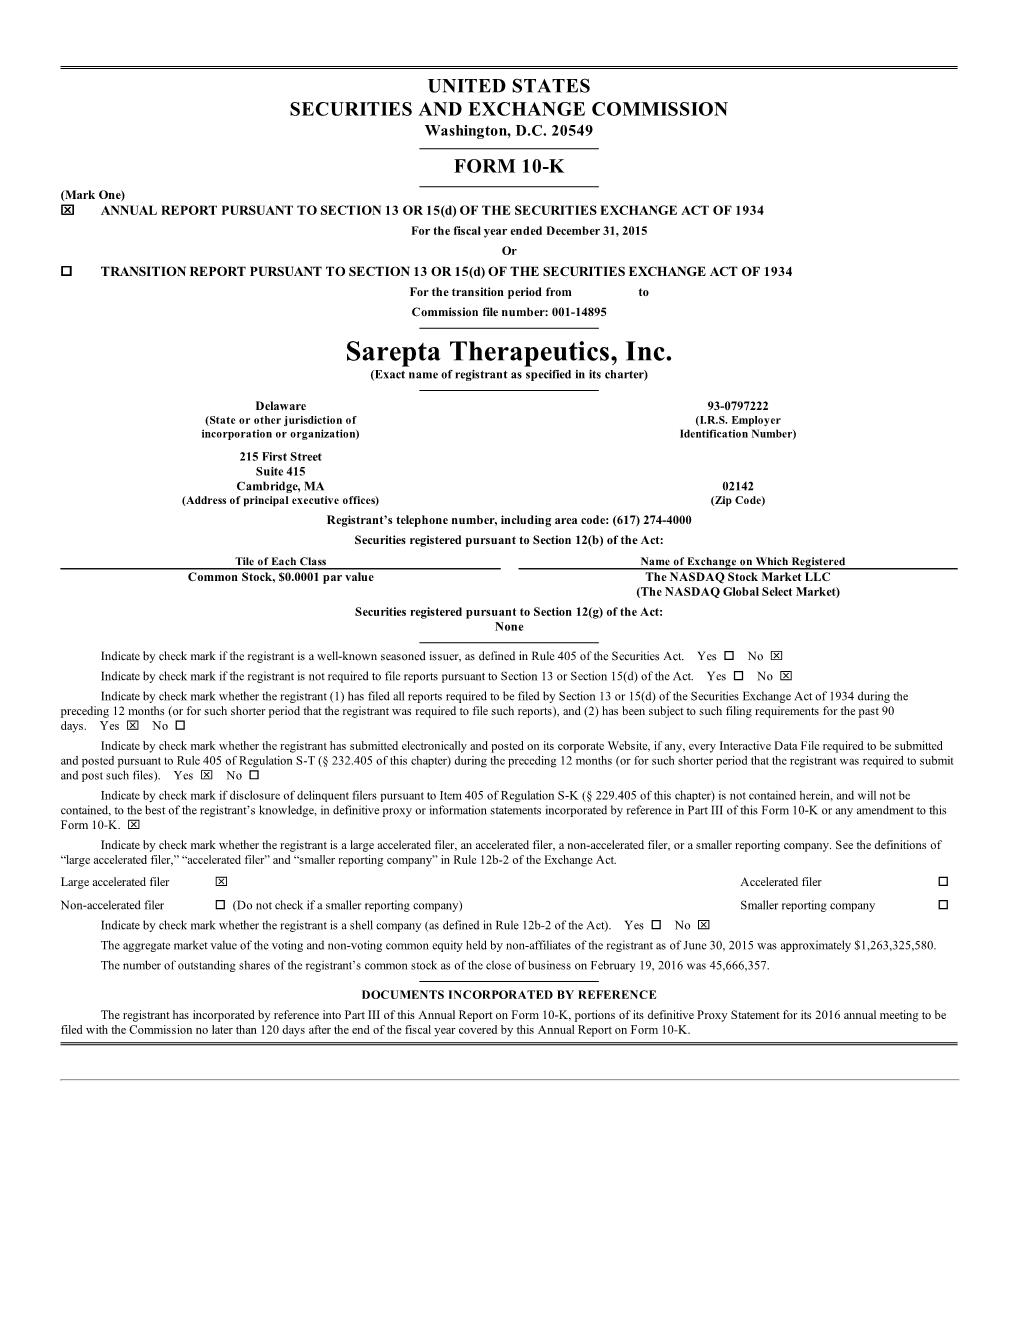 Sarepta Therapeutics, Inc. (Exact Name of Registrant As Specified in Its Charter)